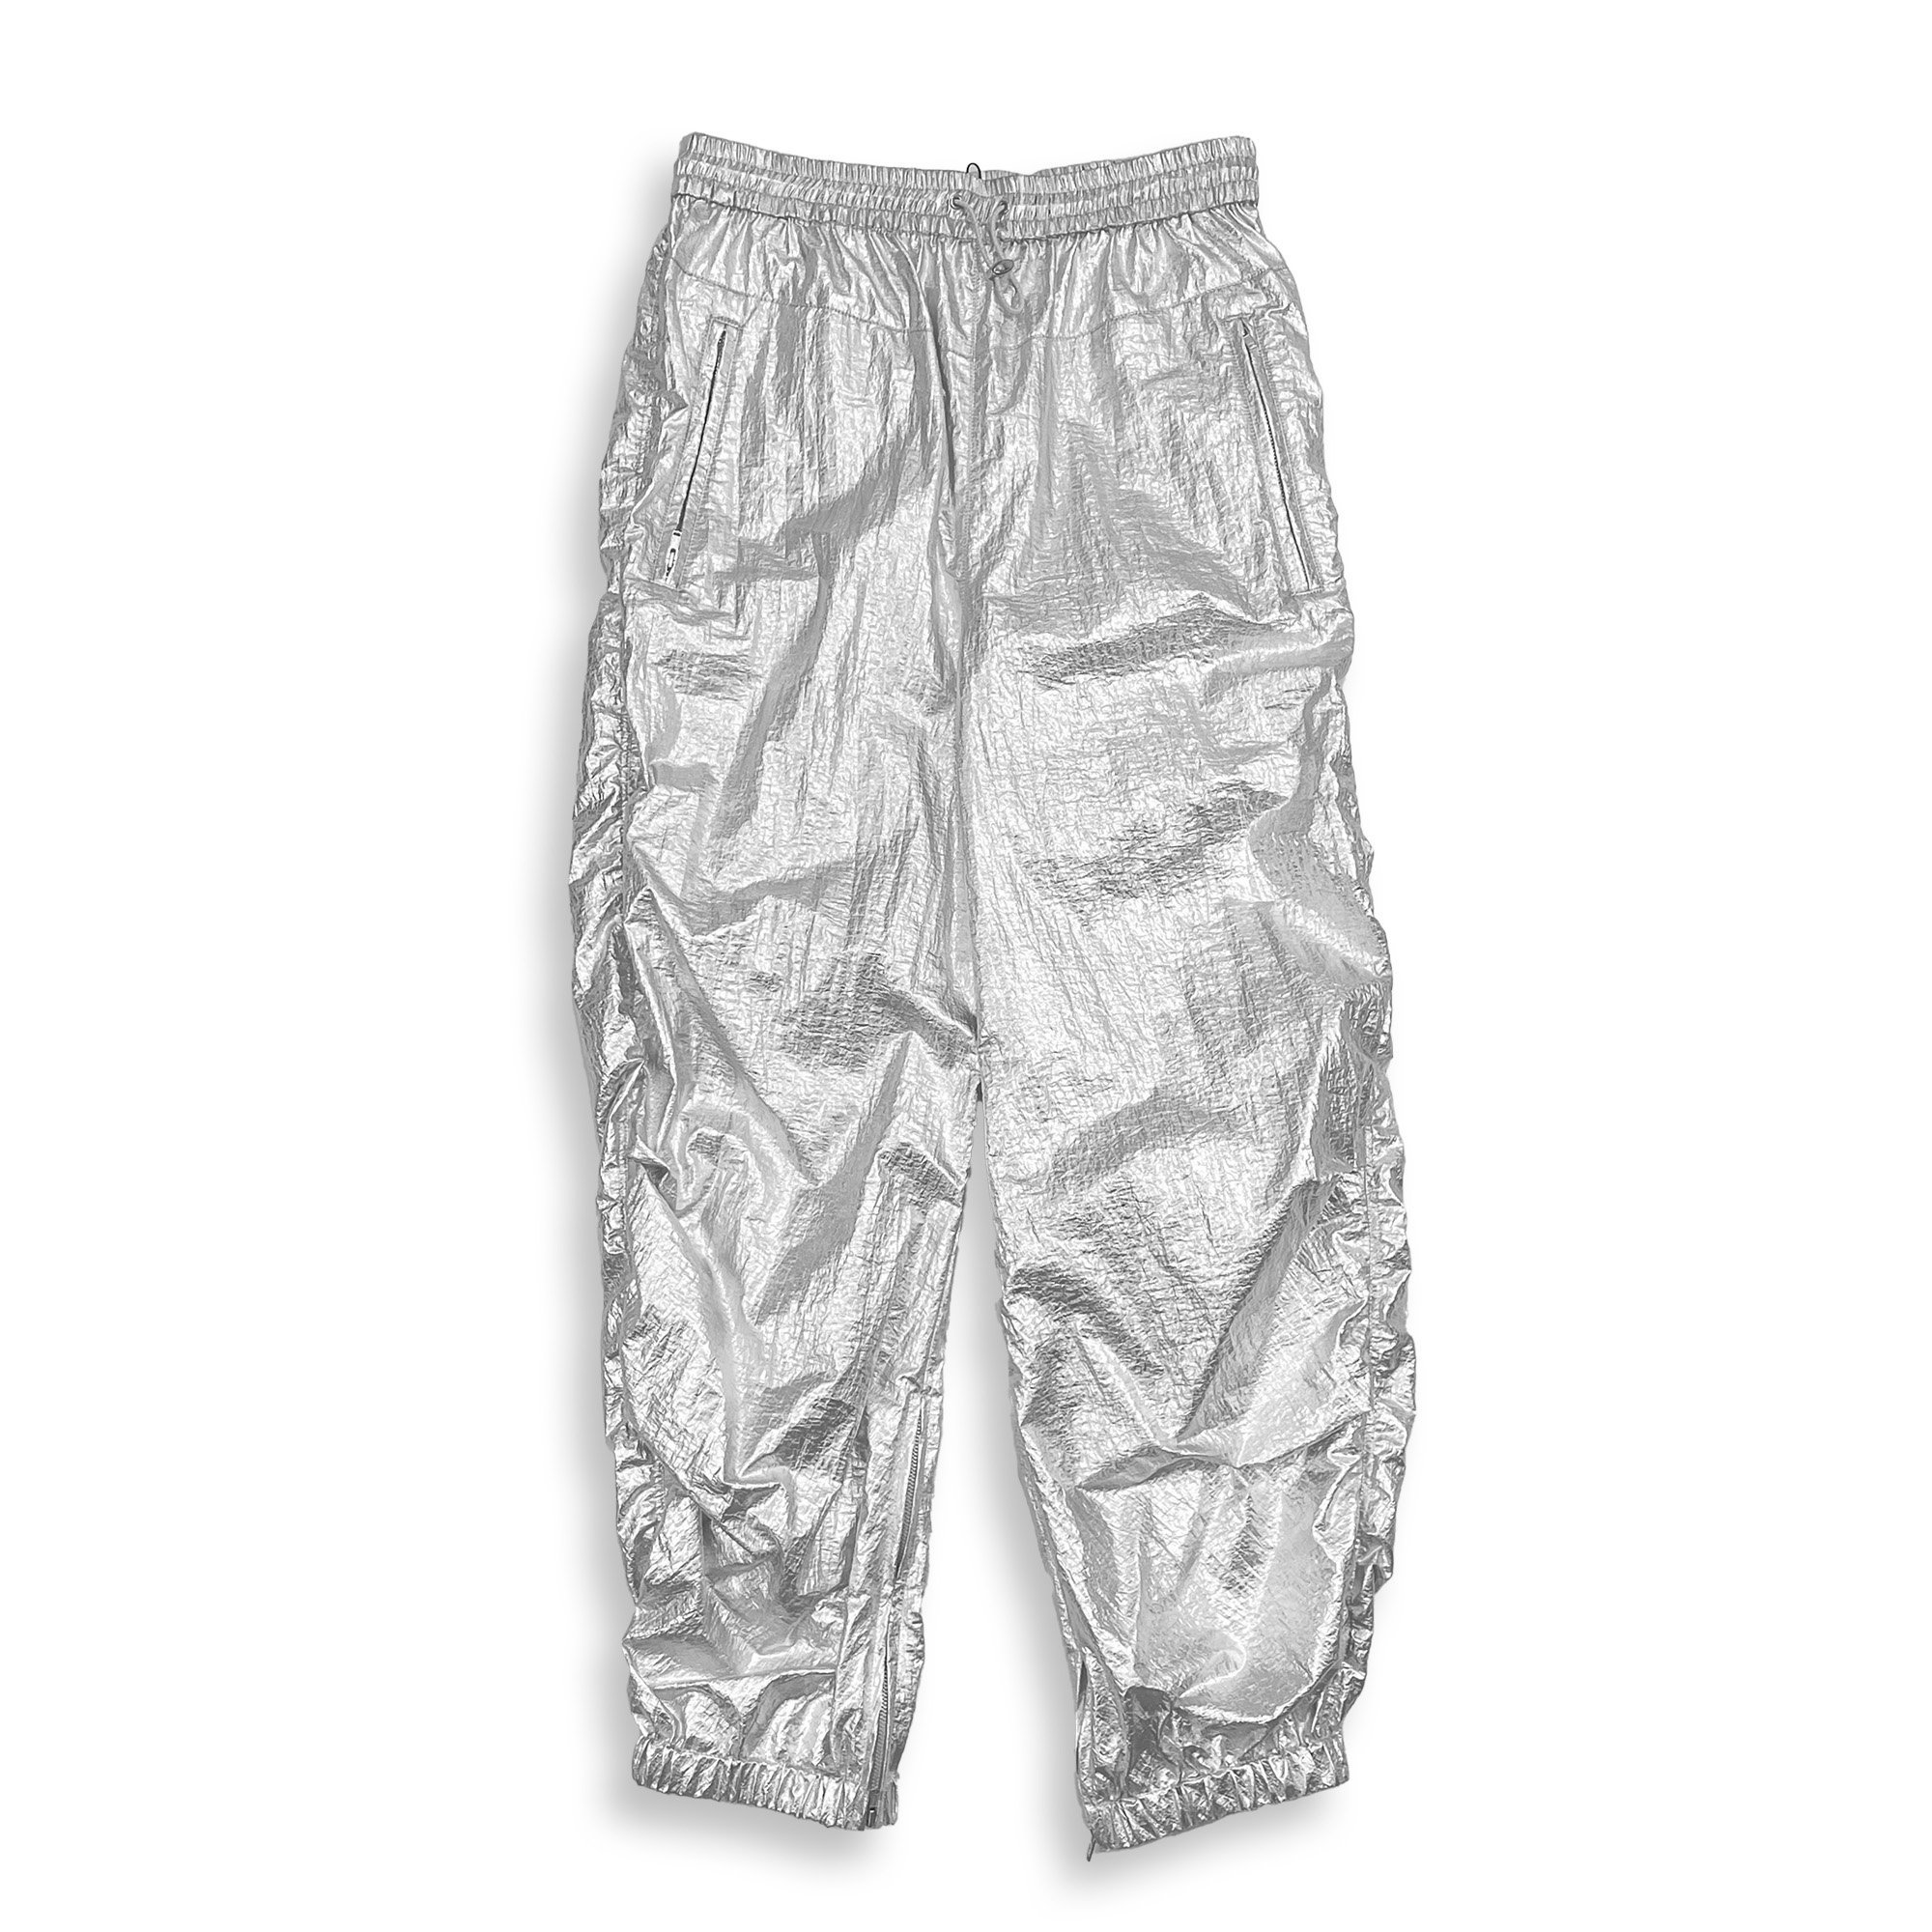 <img class='new_mark_img1' src='https://img.shop-pro.jp/img/new/icons47.gif' style='border:none;display:inline;margin:0px;padding:0px;width:auto;' />VENIT PARACHUTE PANTS